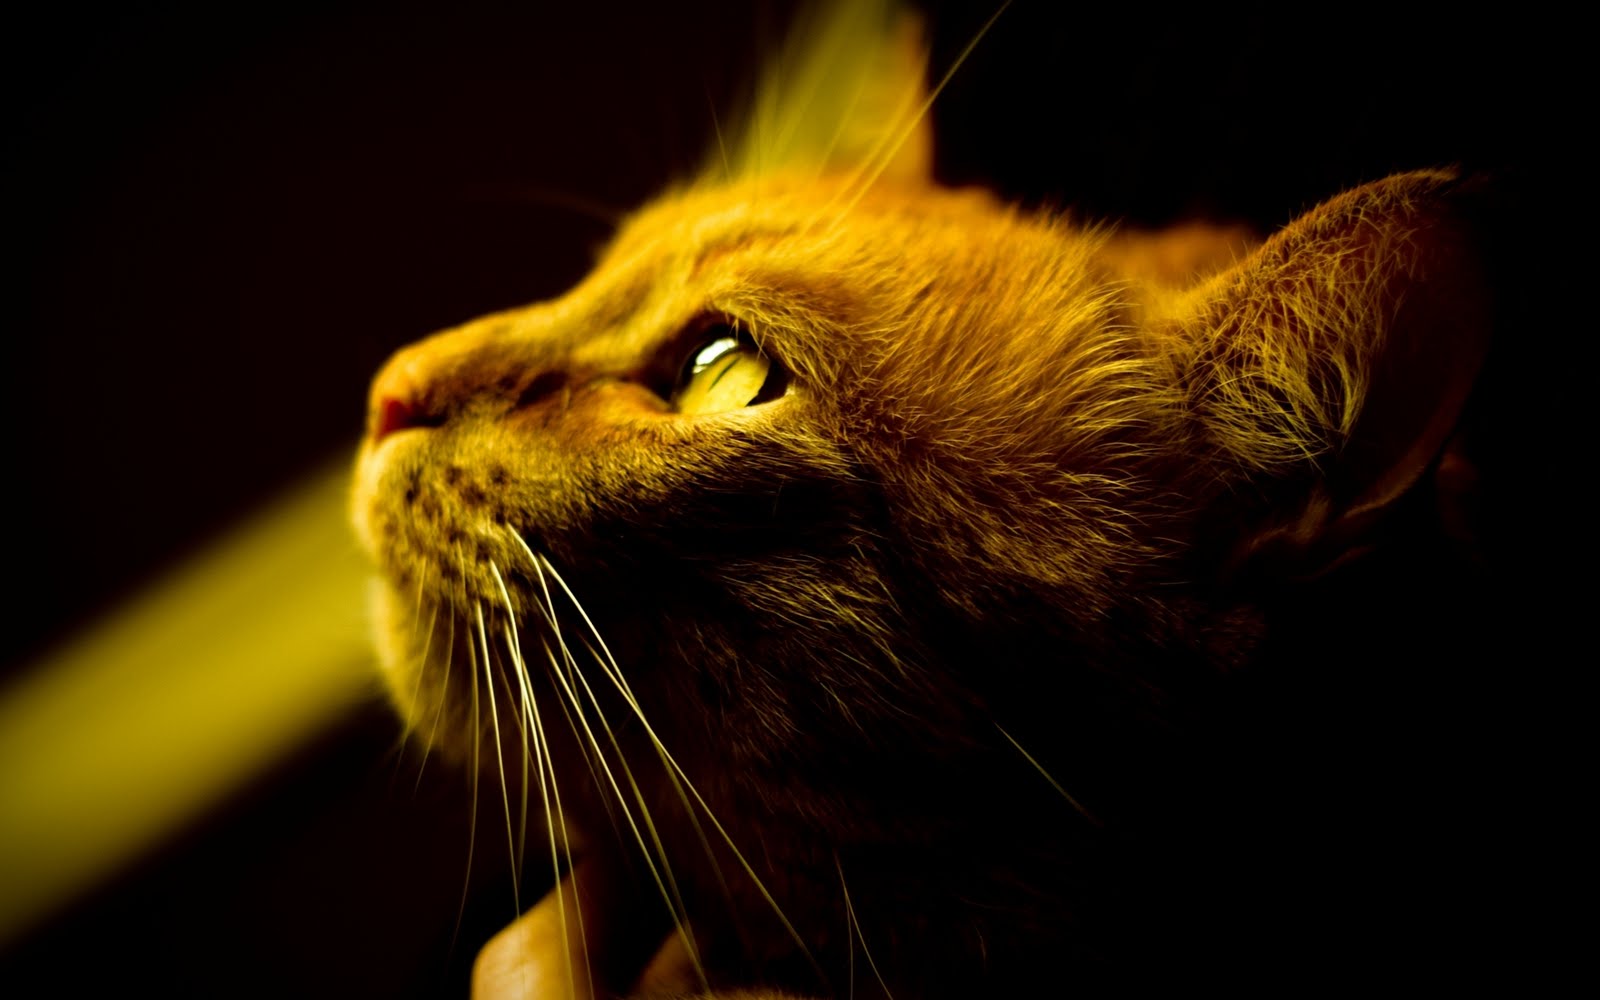 cat in the light cool eye 1080p hd wallpaper is a great wallpaper for